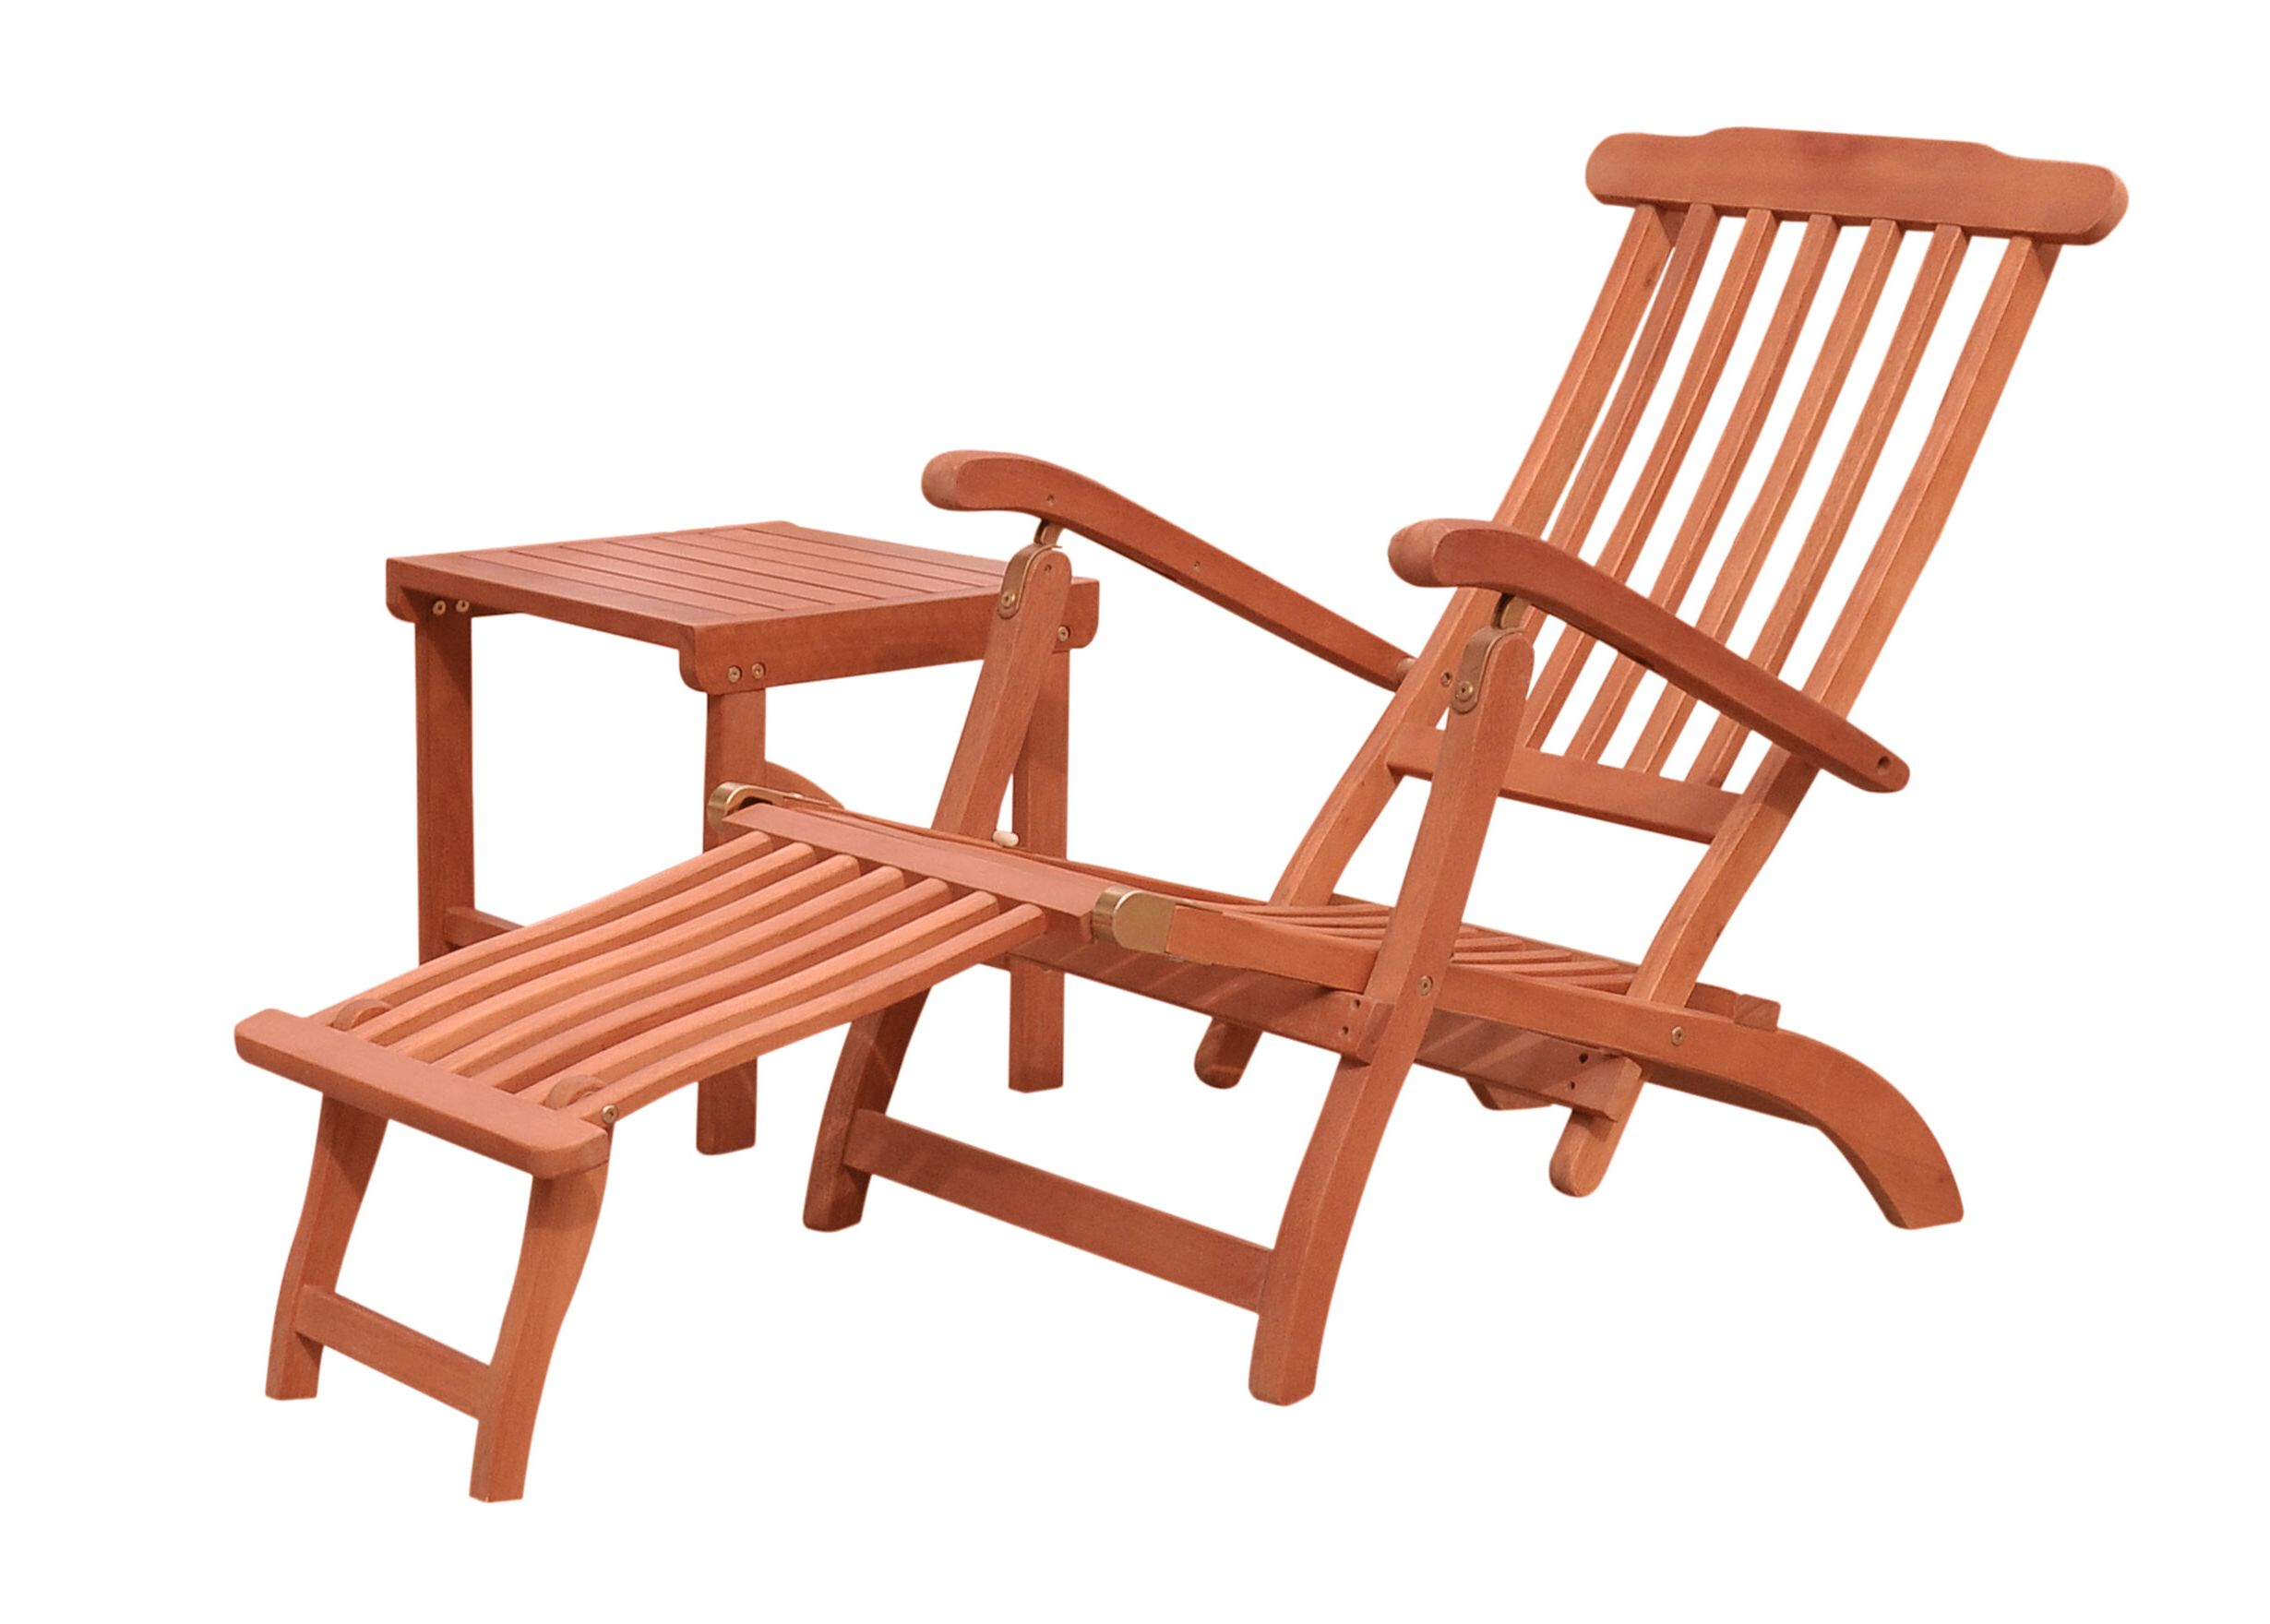 Amabel Wooden Garden Benches Pertaining To Popular Garden Chairs, Swings & Benches Garden Deck Chair Sun (View 28 of 30)